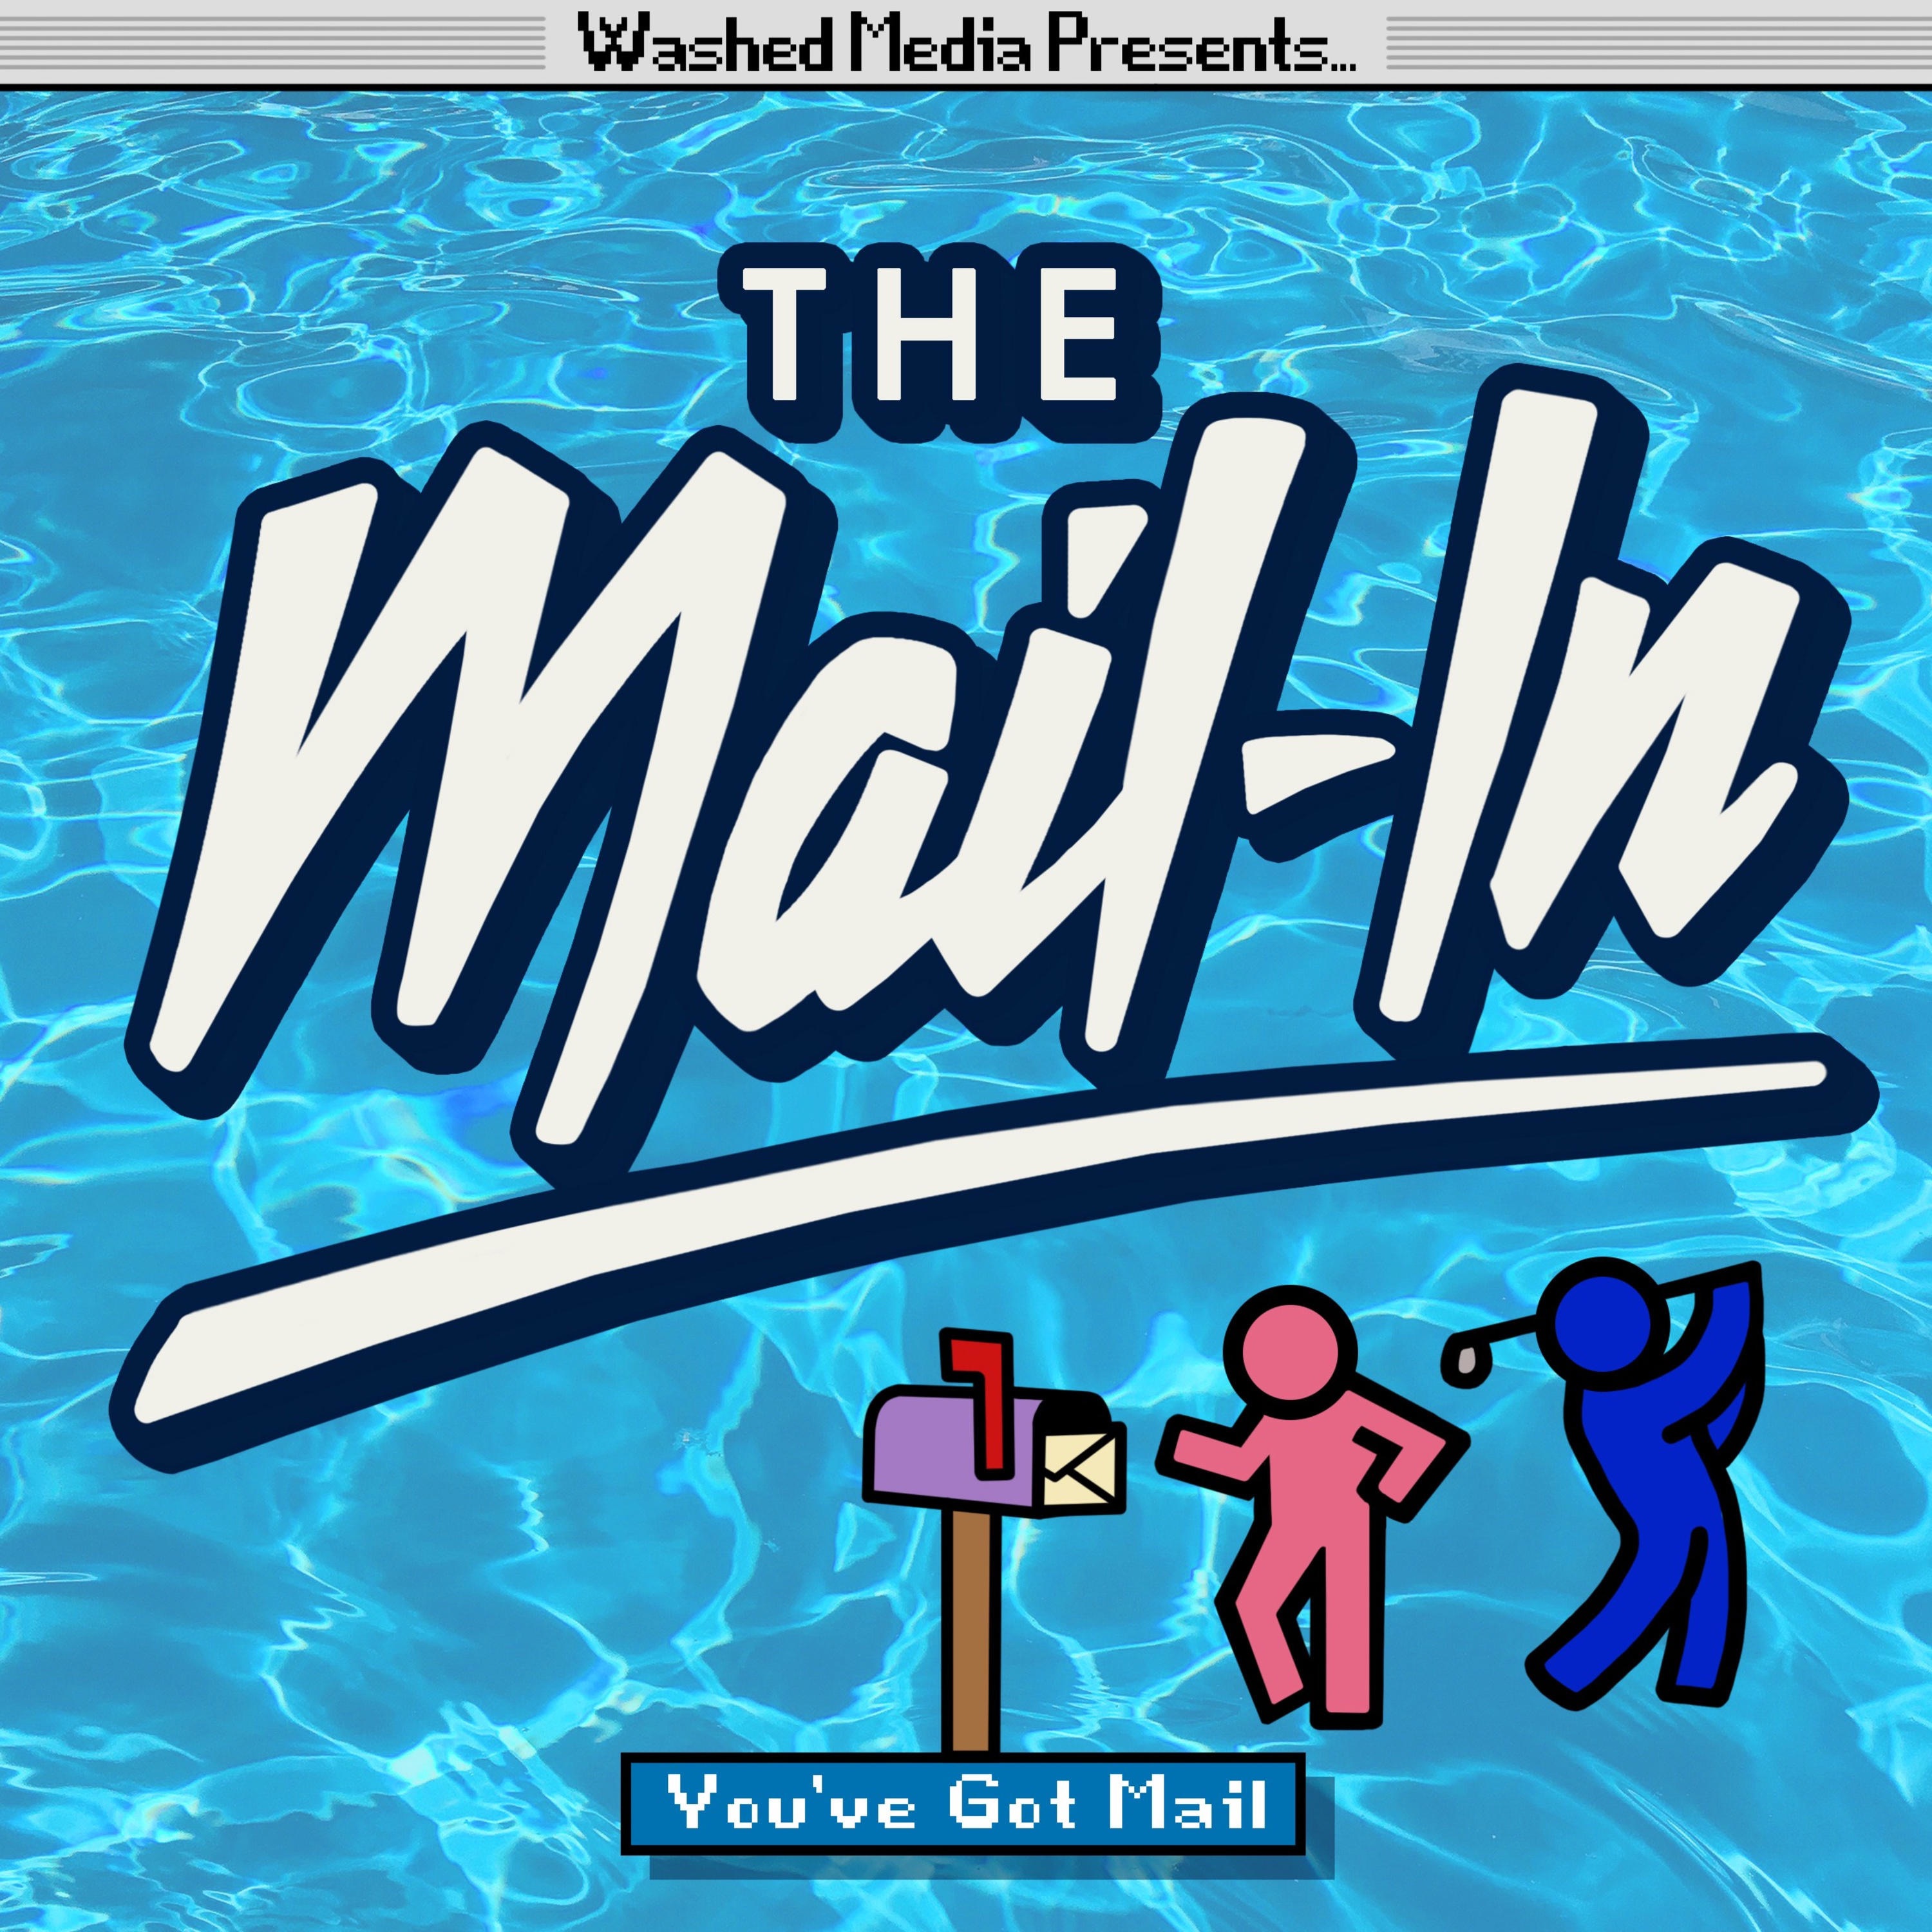 my-friend-s-wife-is-too-close-with-another-man-the-mail-in-podcast